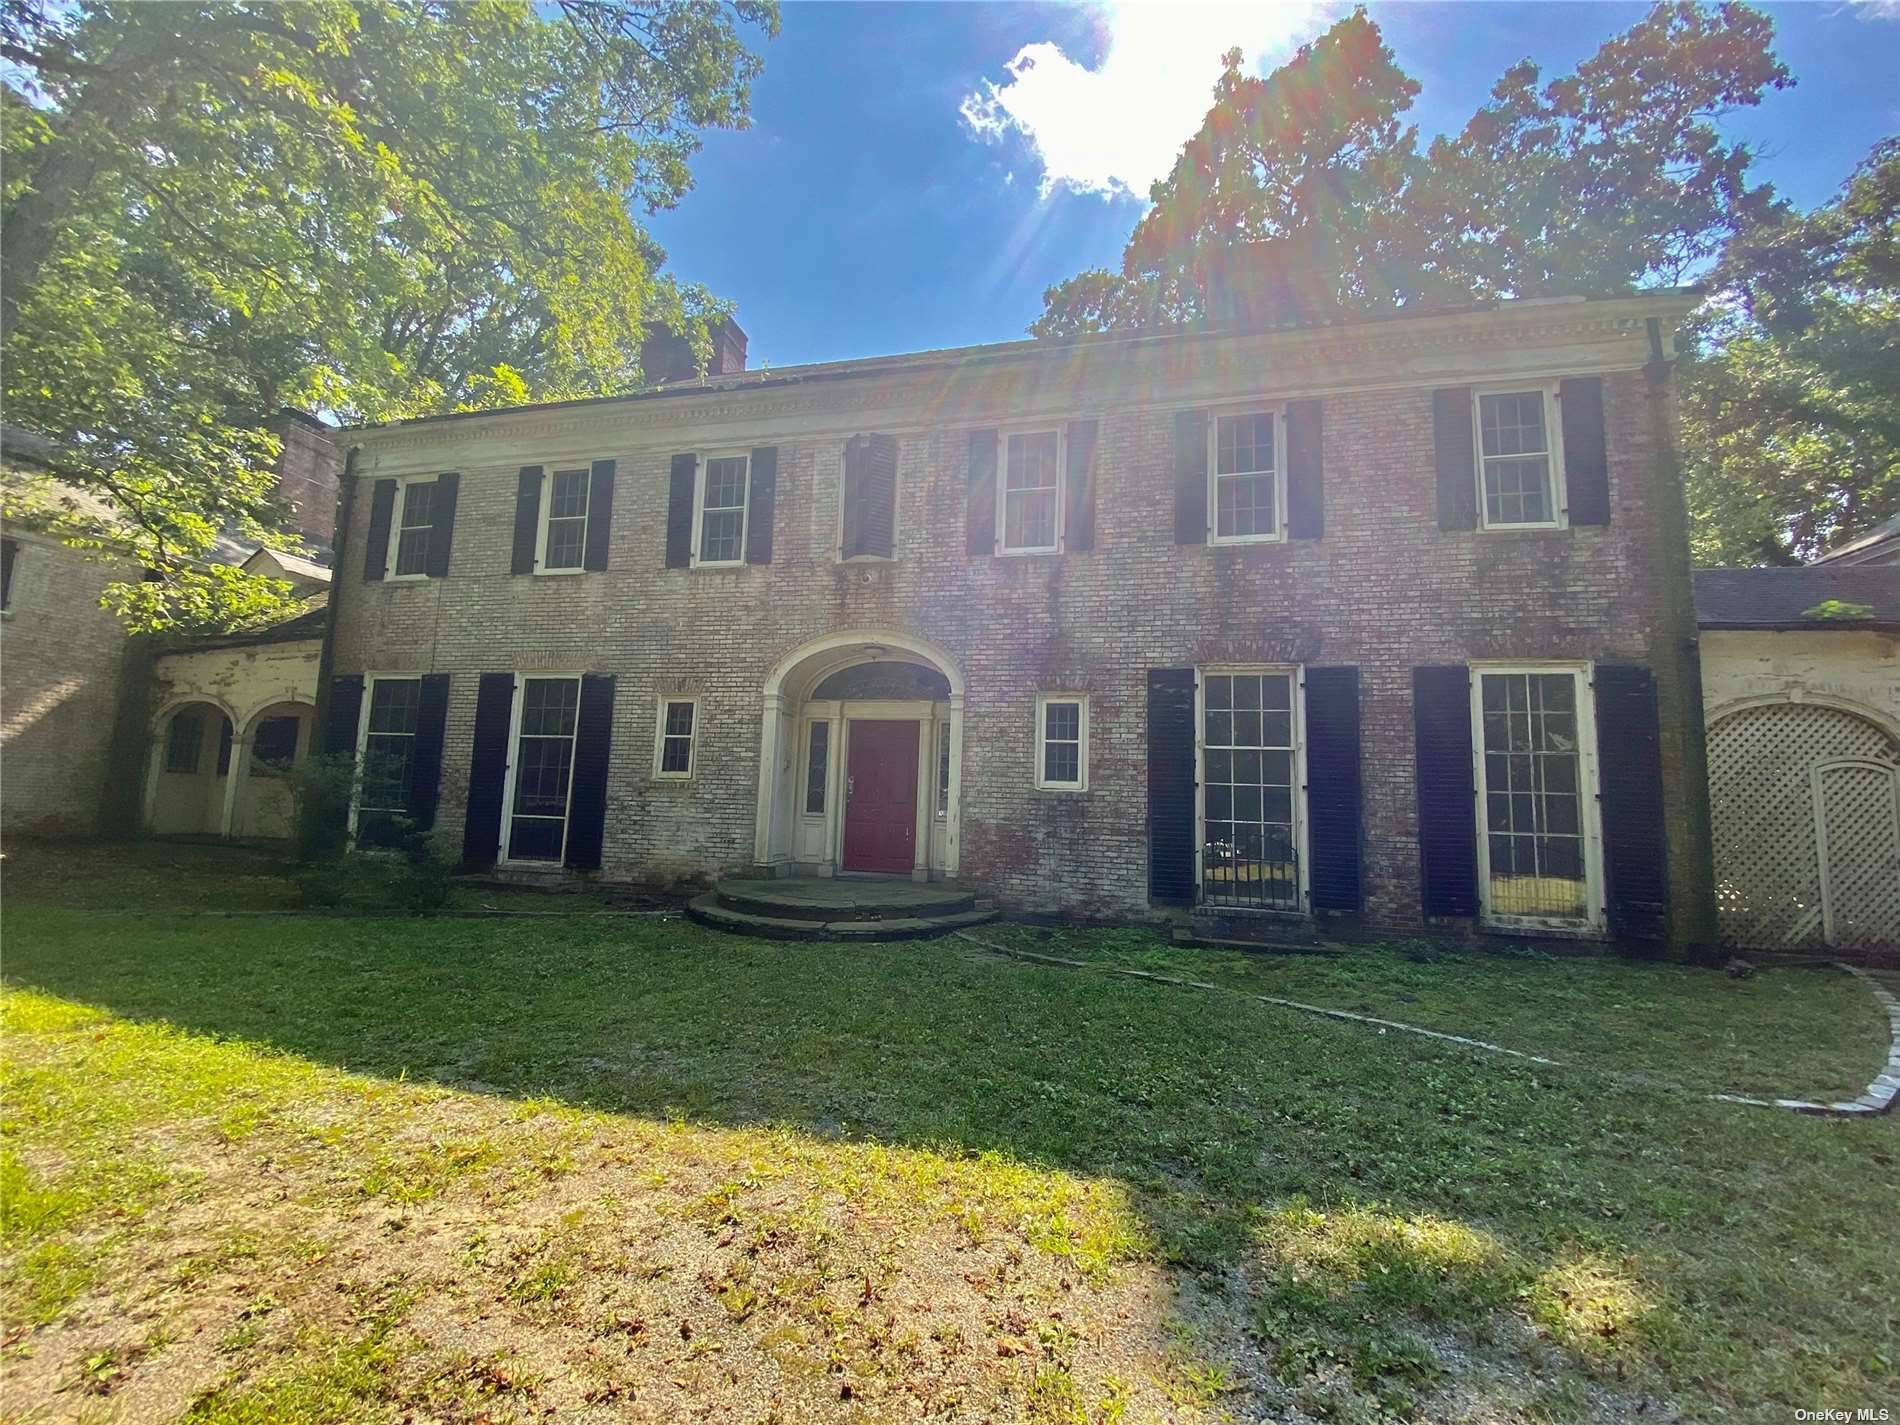 A Timeless Brick Manor, The Monday House Is Situated In The Heart Of Upper Brookville Located At The Oaks At Mill River.